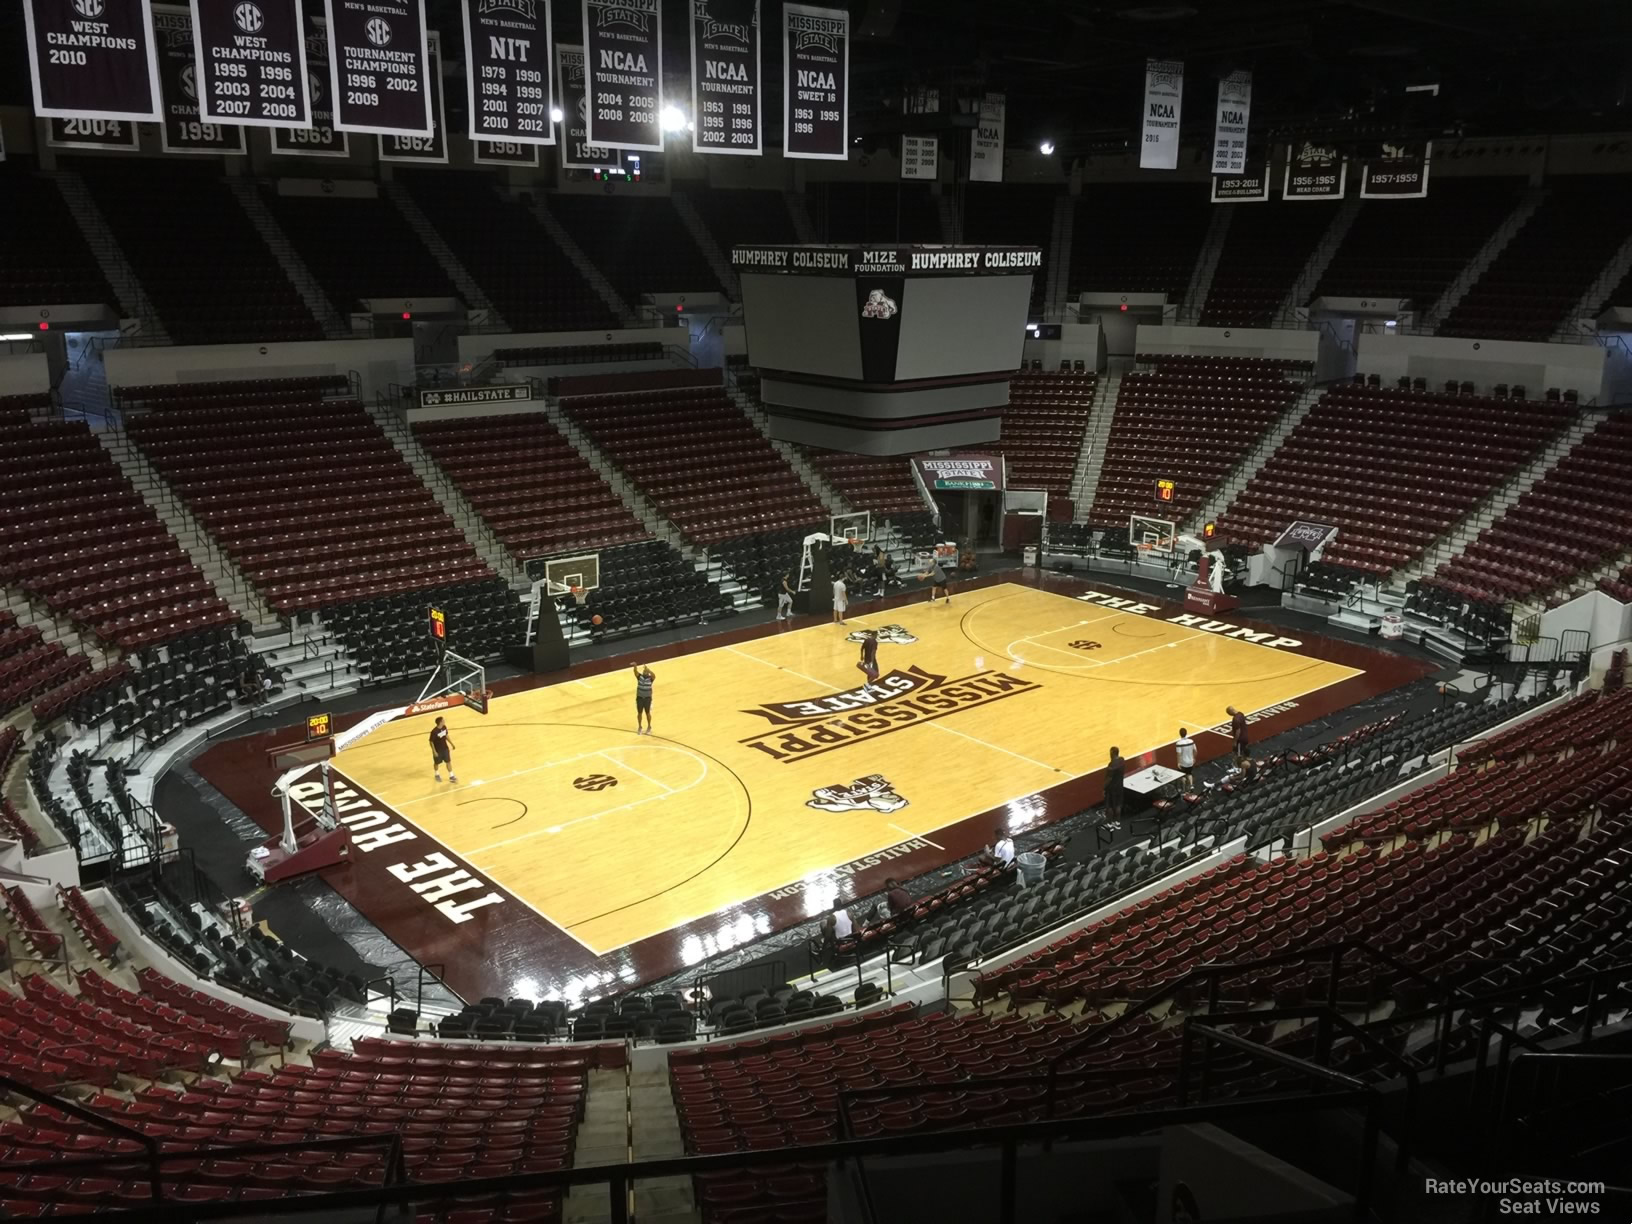 section 232, row 8 seat view  - humphrey coliseum